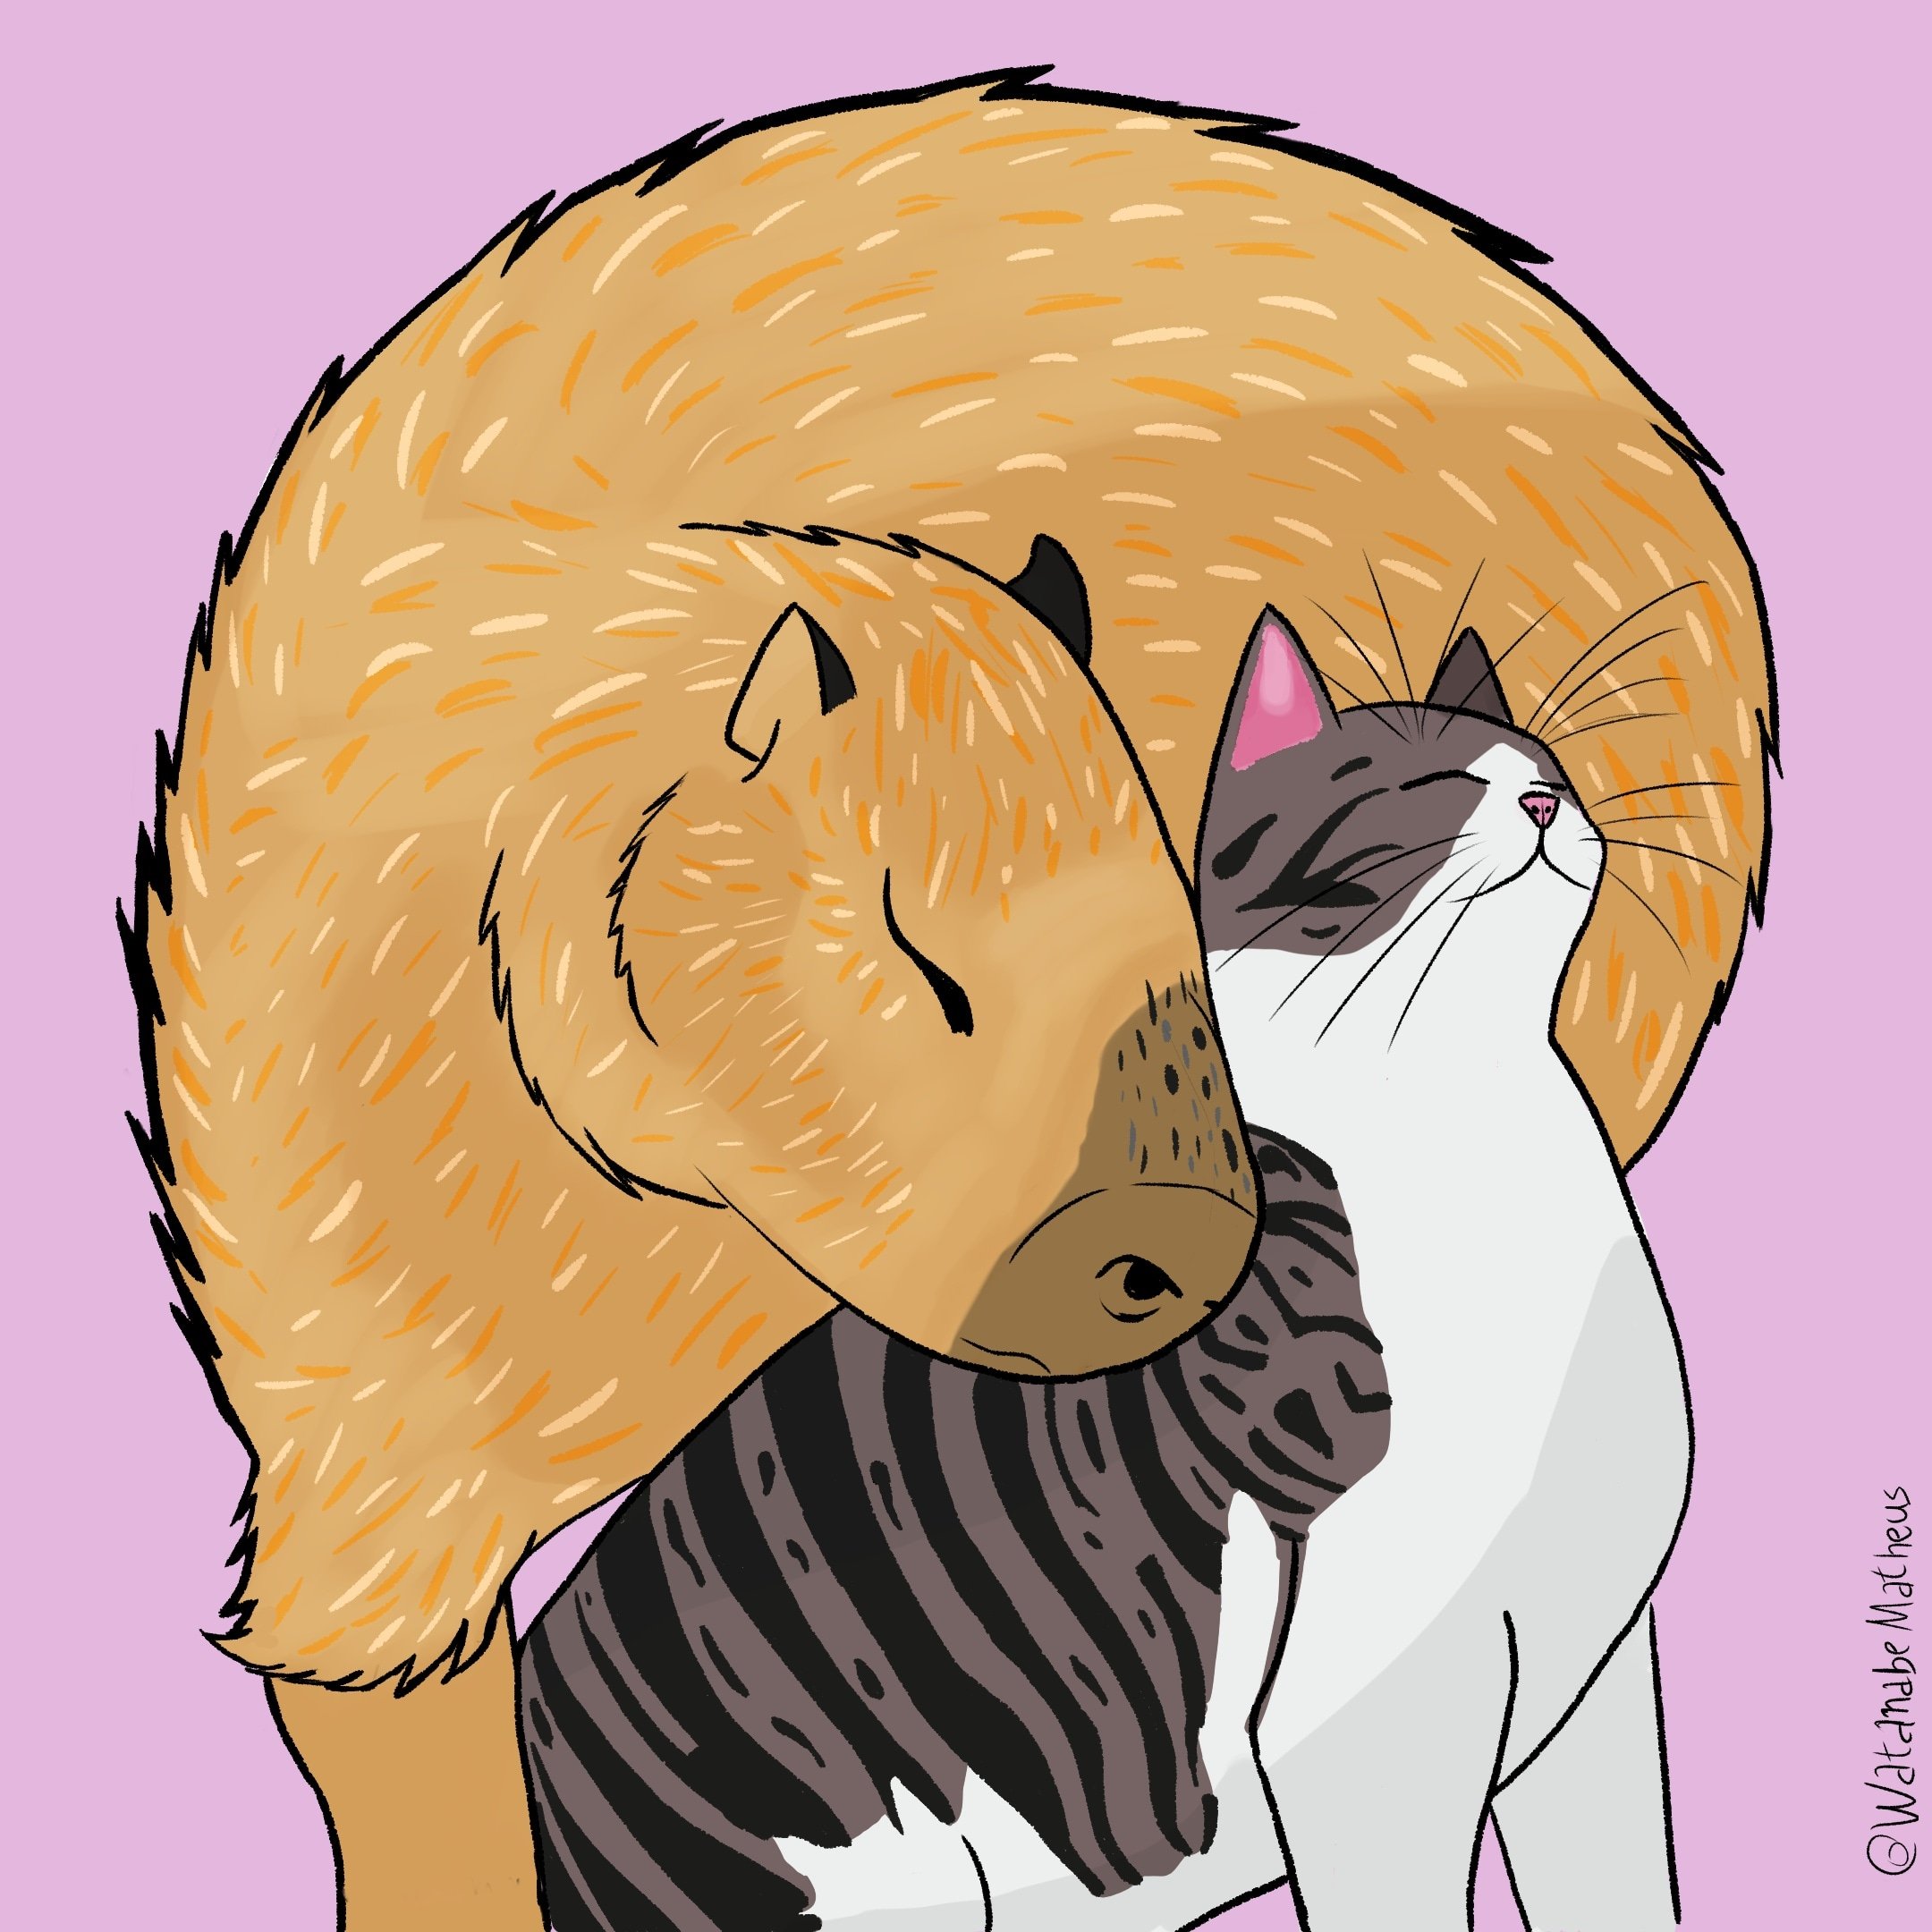 Watanabe on X: Maxixe Glutton and Lola, the affectionate capybara. Type  Hello Maxixe and Lola to have a great weekend. #art #digitalart #drawing  #draw #drawings #paint #digitalpaint #pet #capybara #cats #cat #arte #